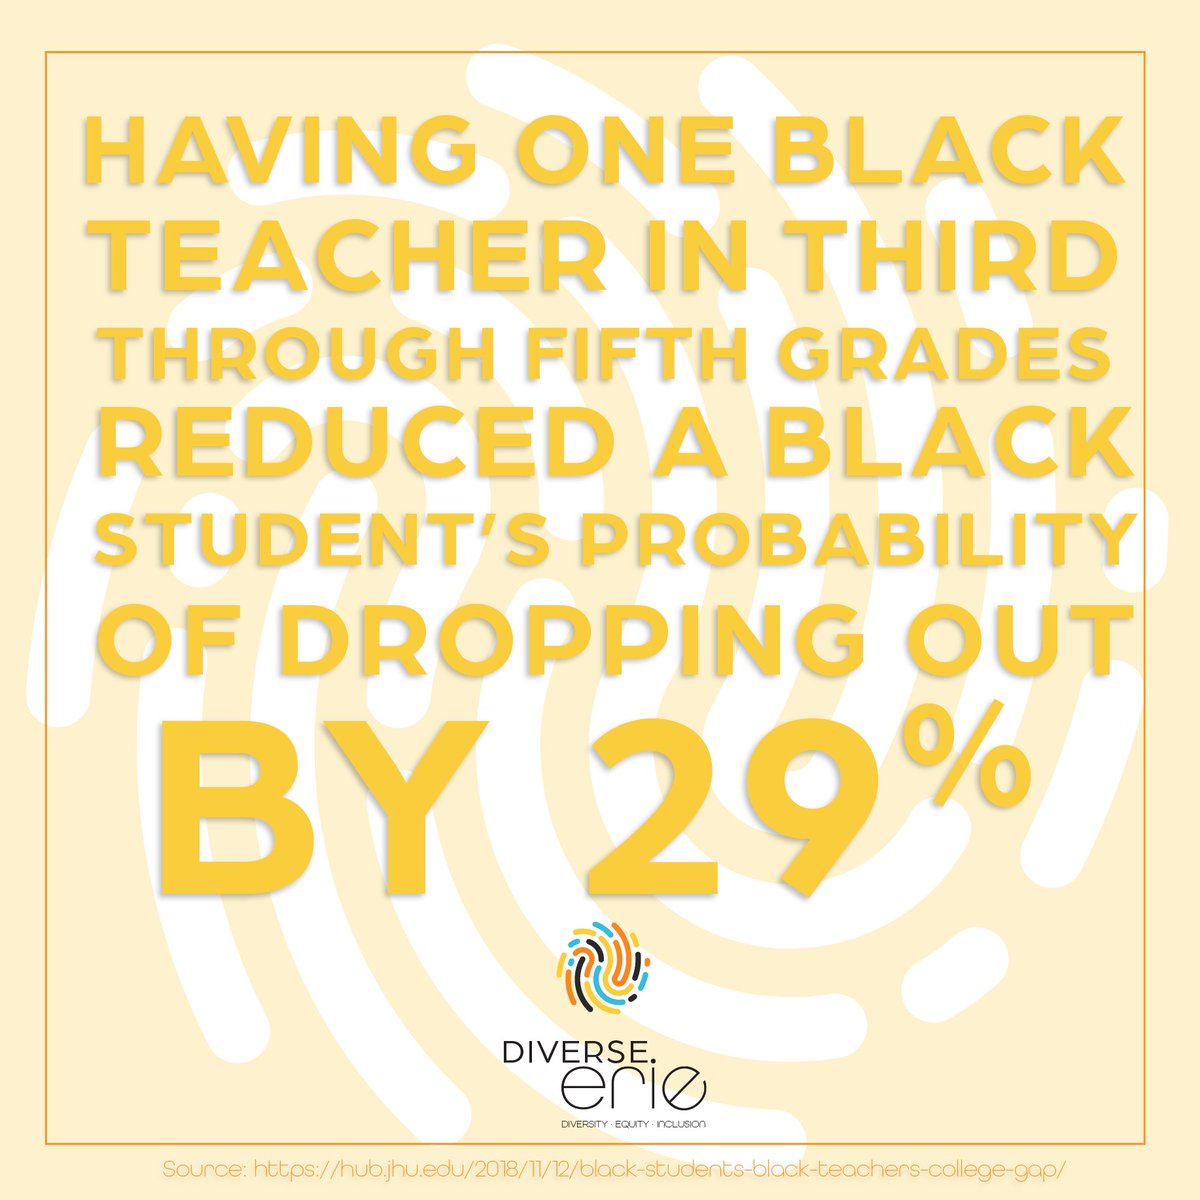 When a Black student experiences the gift of a Black educator, it makes an extraordinary impact on their learning, setting them up for success not only in the classroom, but in life.

Join the #DiverseErie conversation. #TeacherAppreciationWeek #DEI